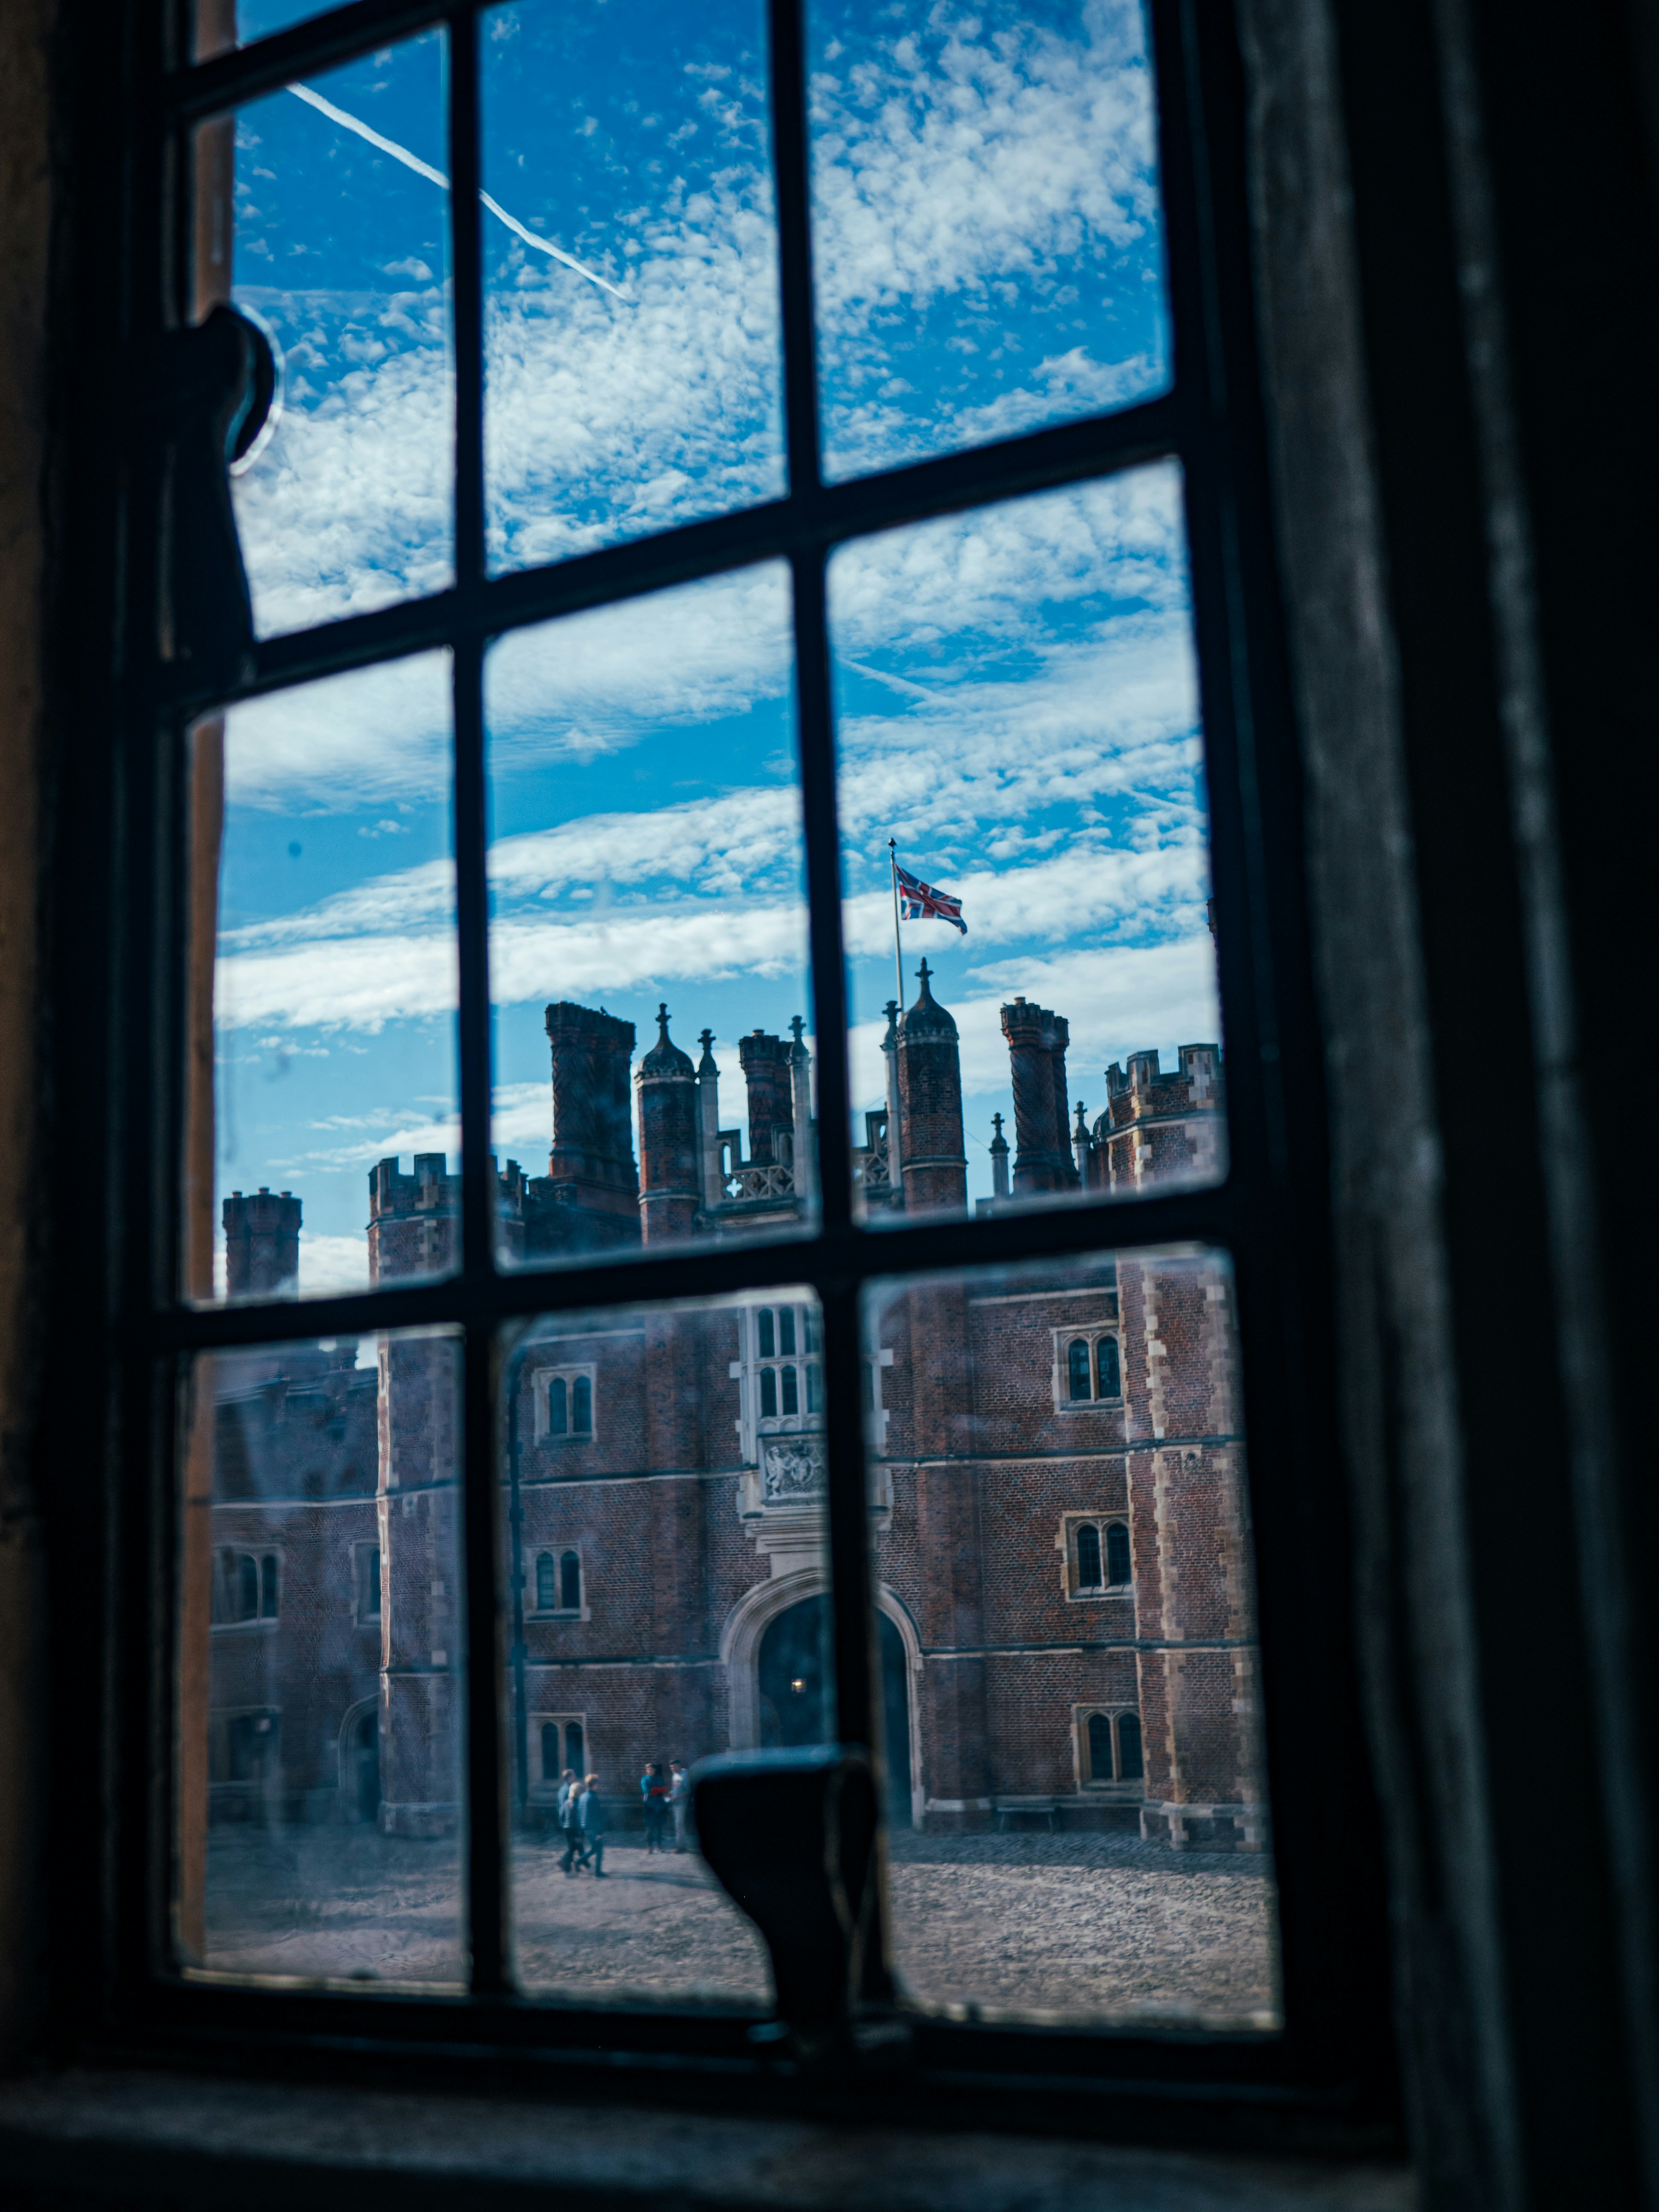 Looking out a window at the Union Jack at Hampton Court Palace.